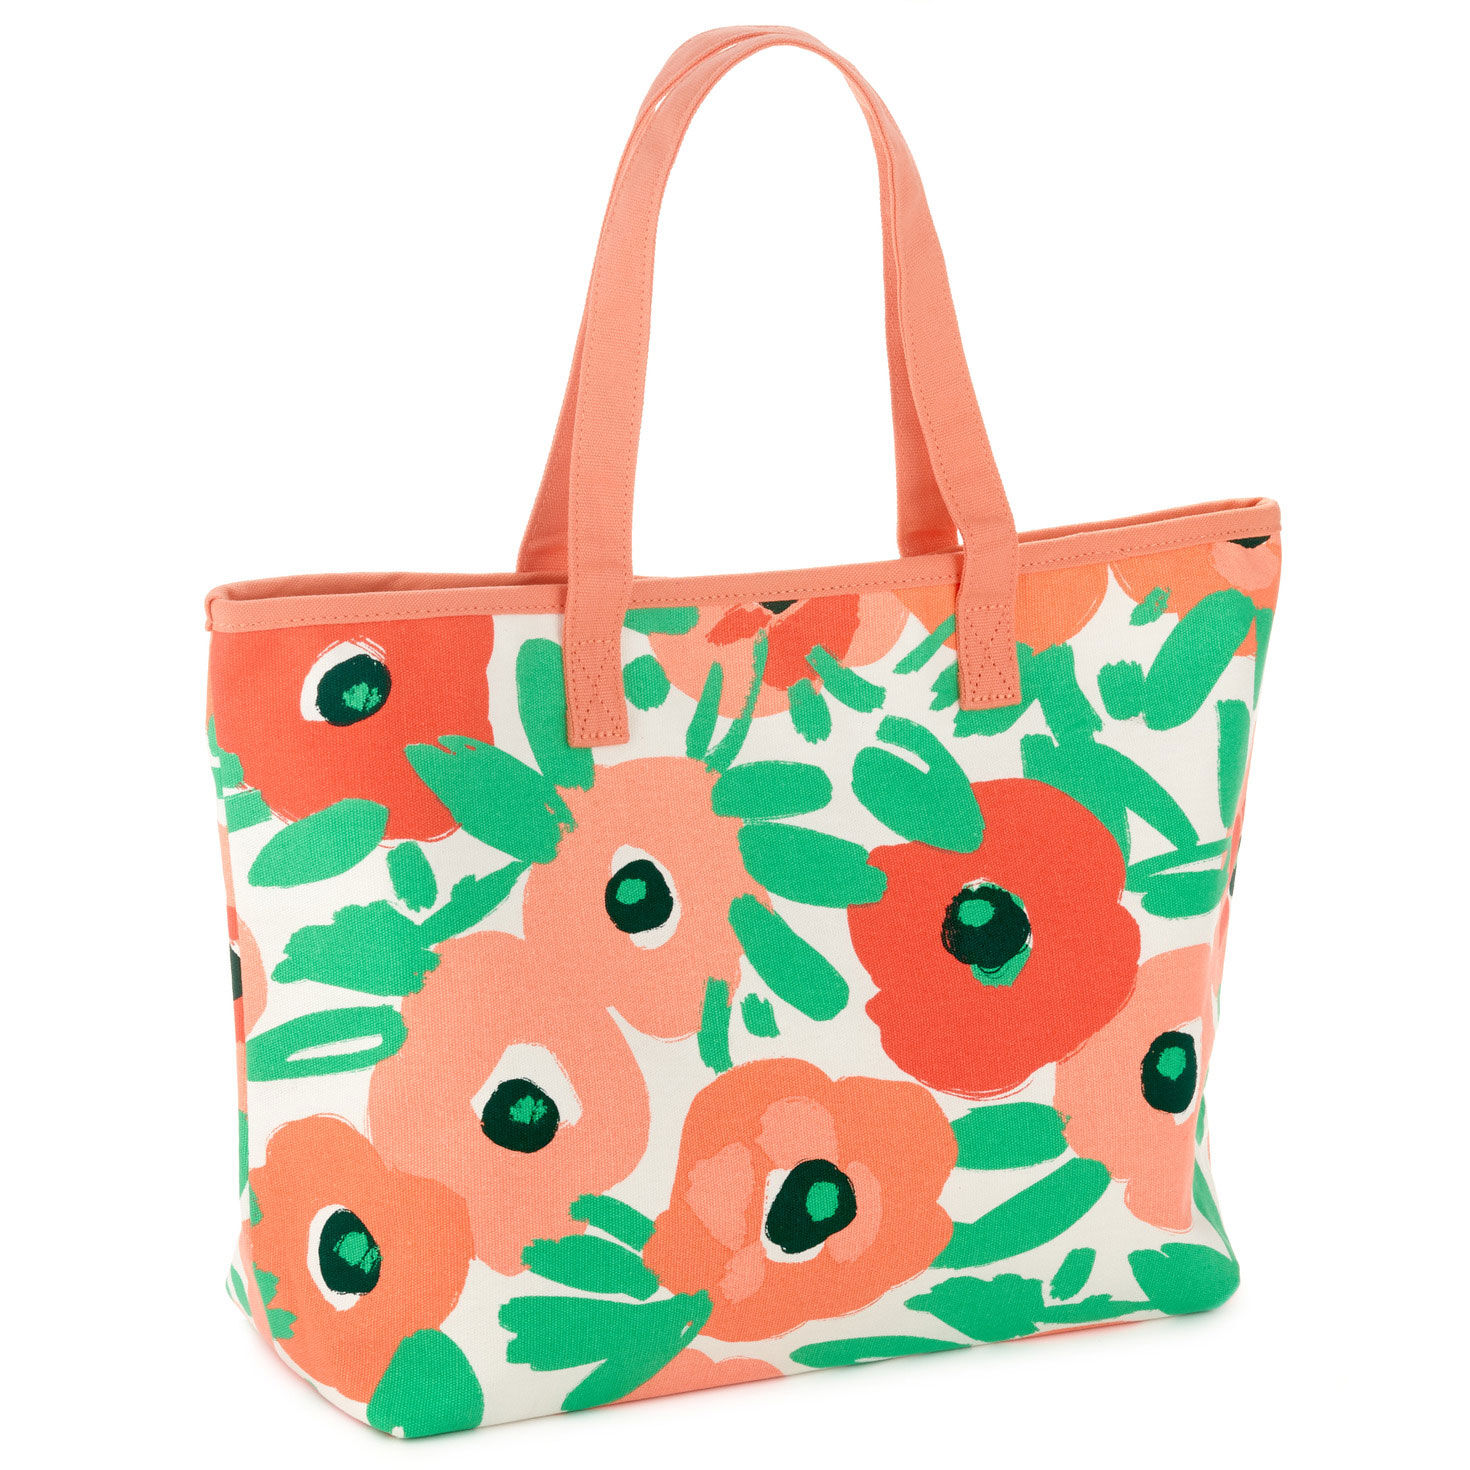 Abstract Floral Tote Bag for only USD 34.99 | Hallmark